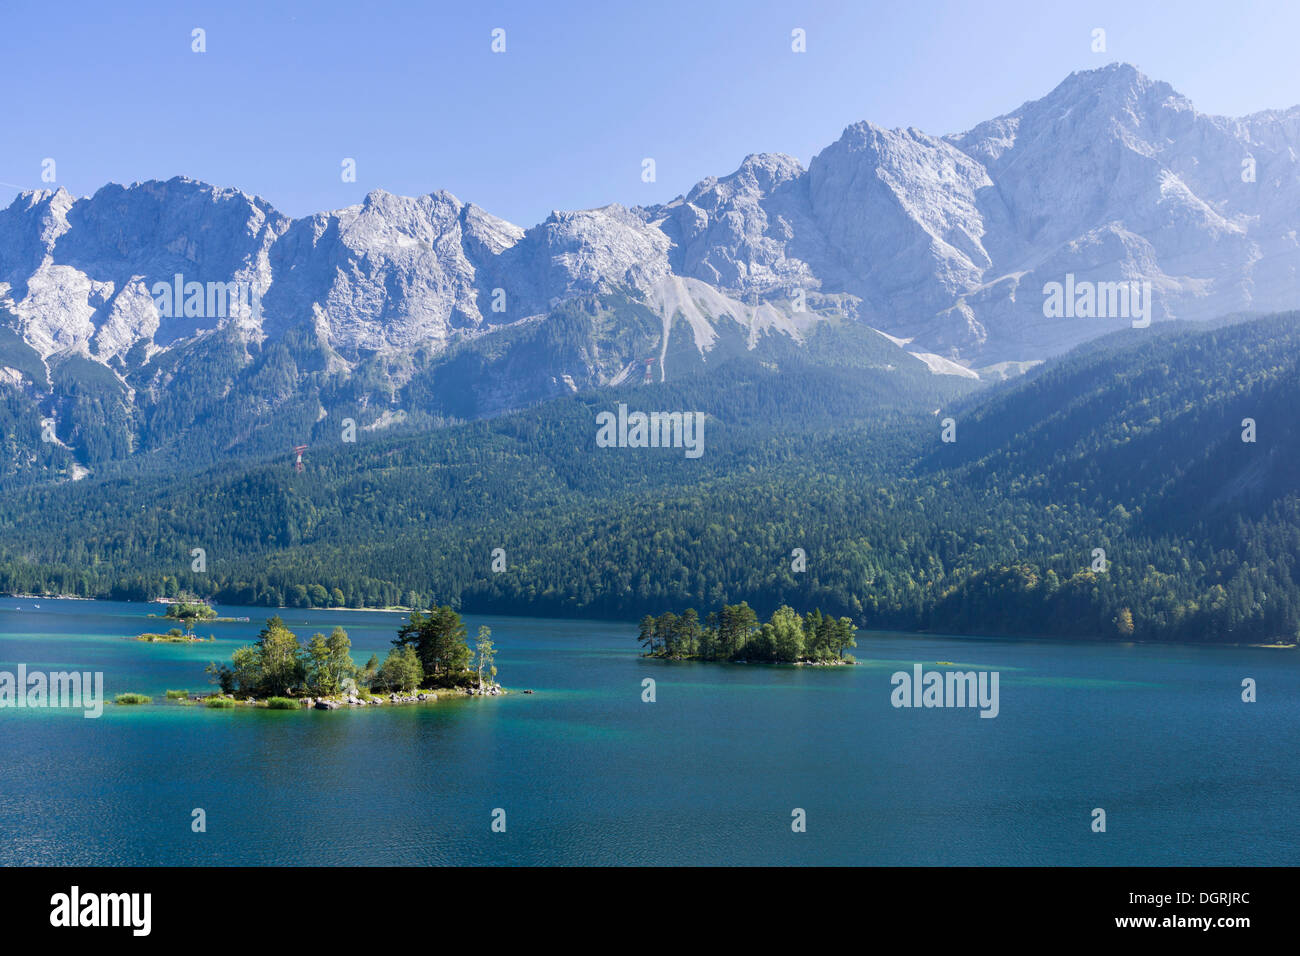 Islands of Eibsee lake with Mt Zugspitze, Bavaria Stock Photo